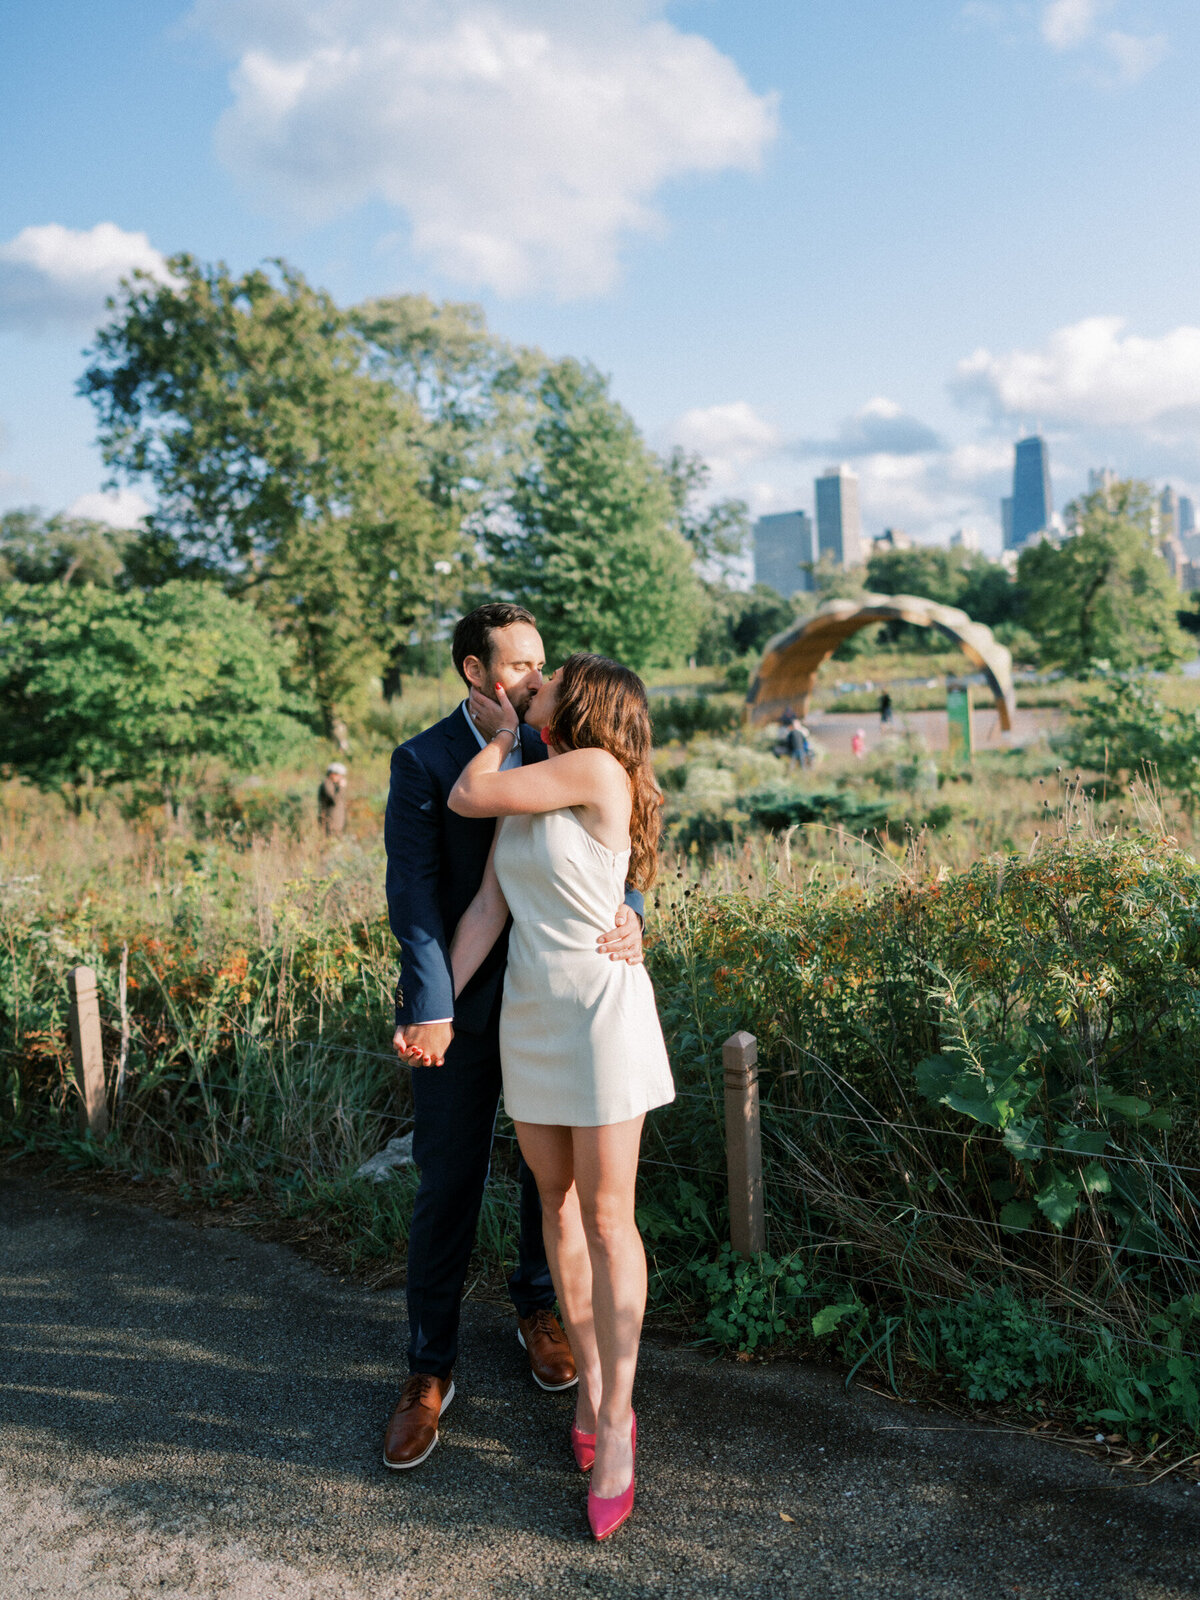 Lincoln Park Chicago Fall Engagement Session Highlights | Amarachi Ikeji Photography 26